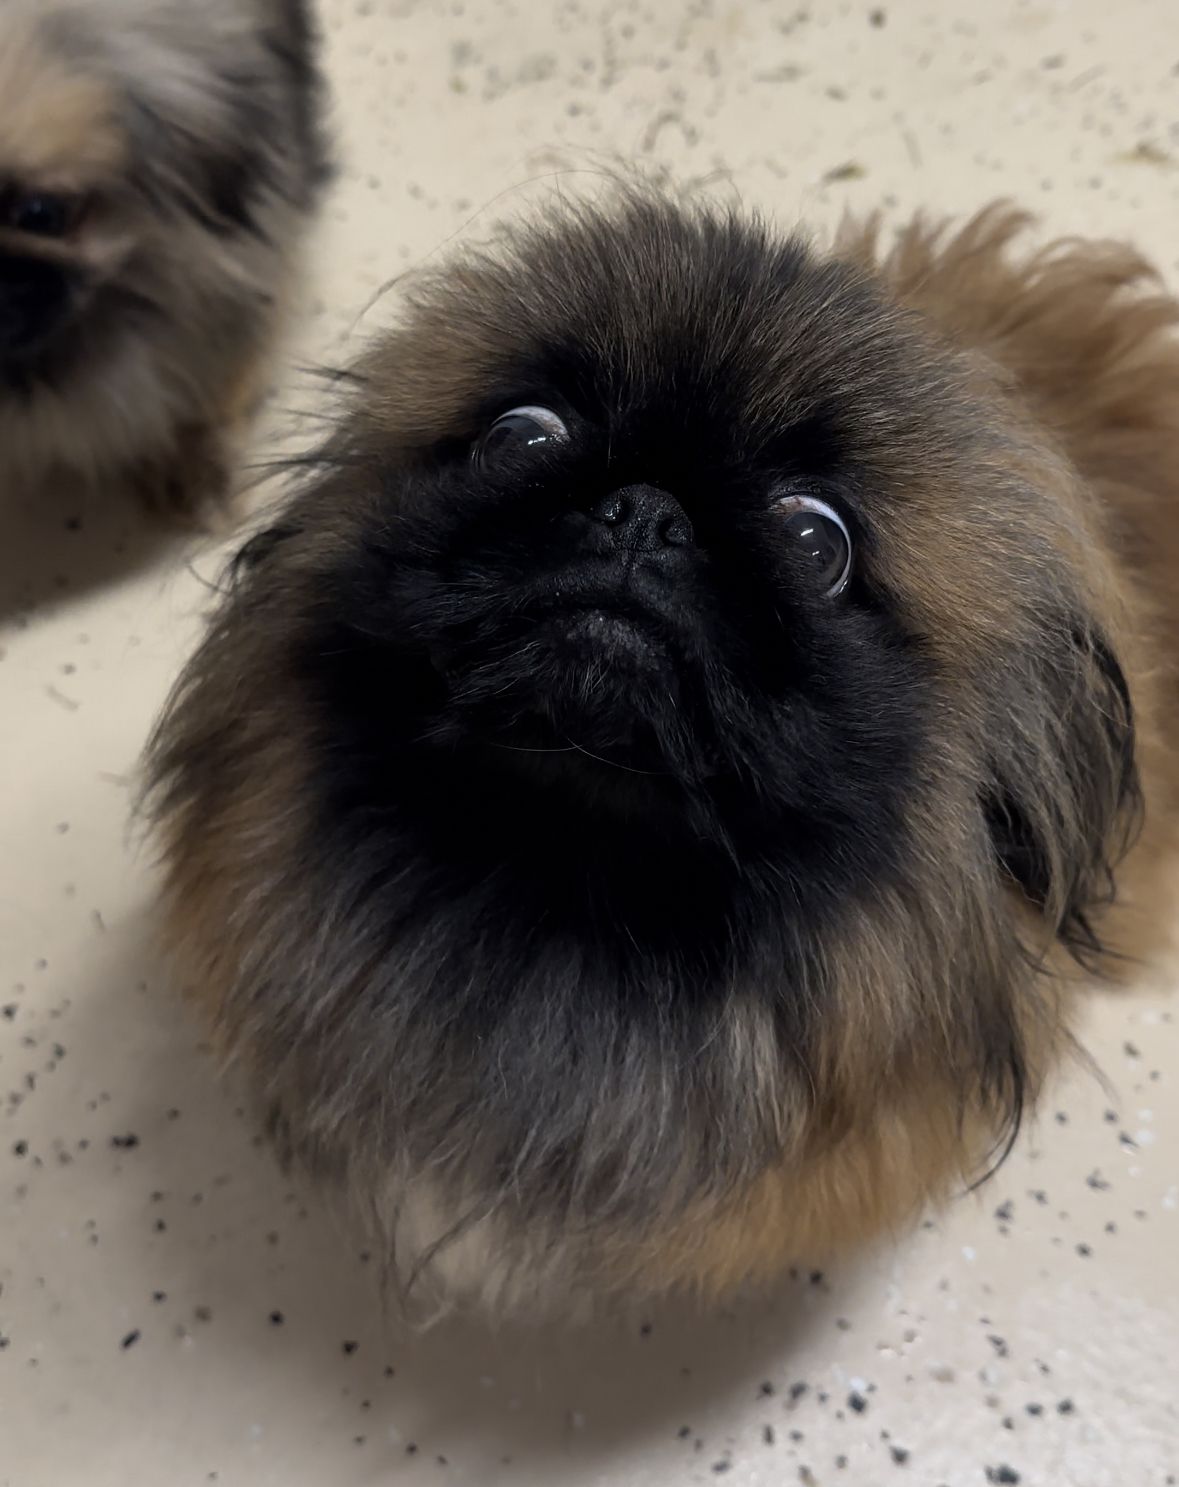 A pair of Pekingese dogs for sale